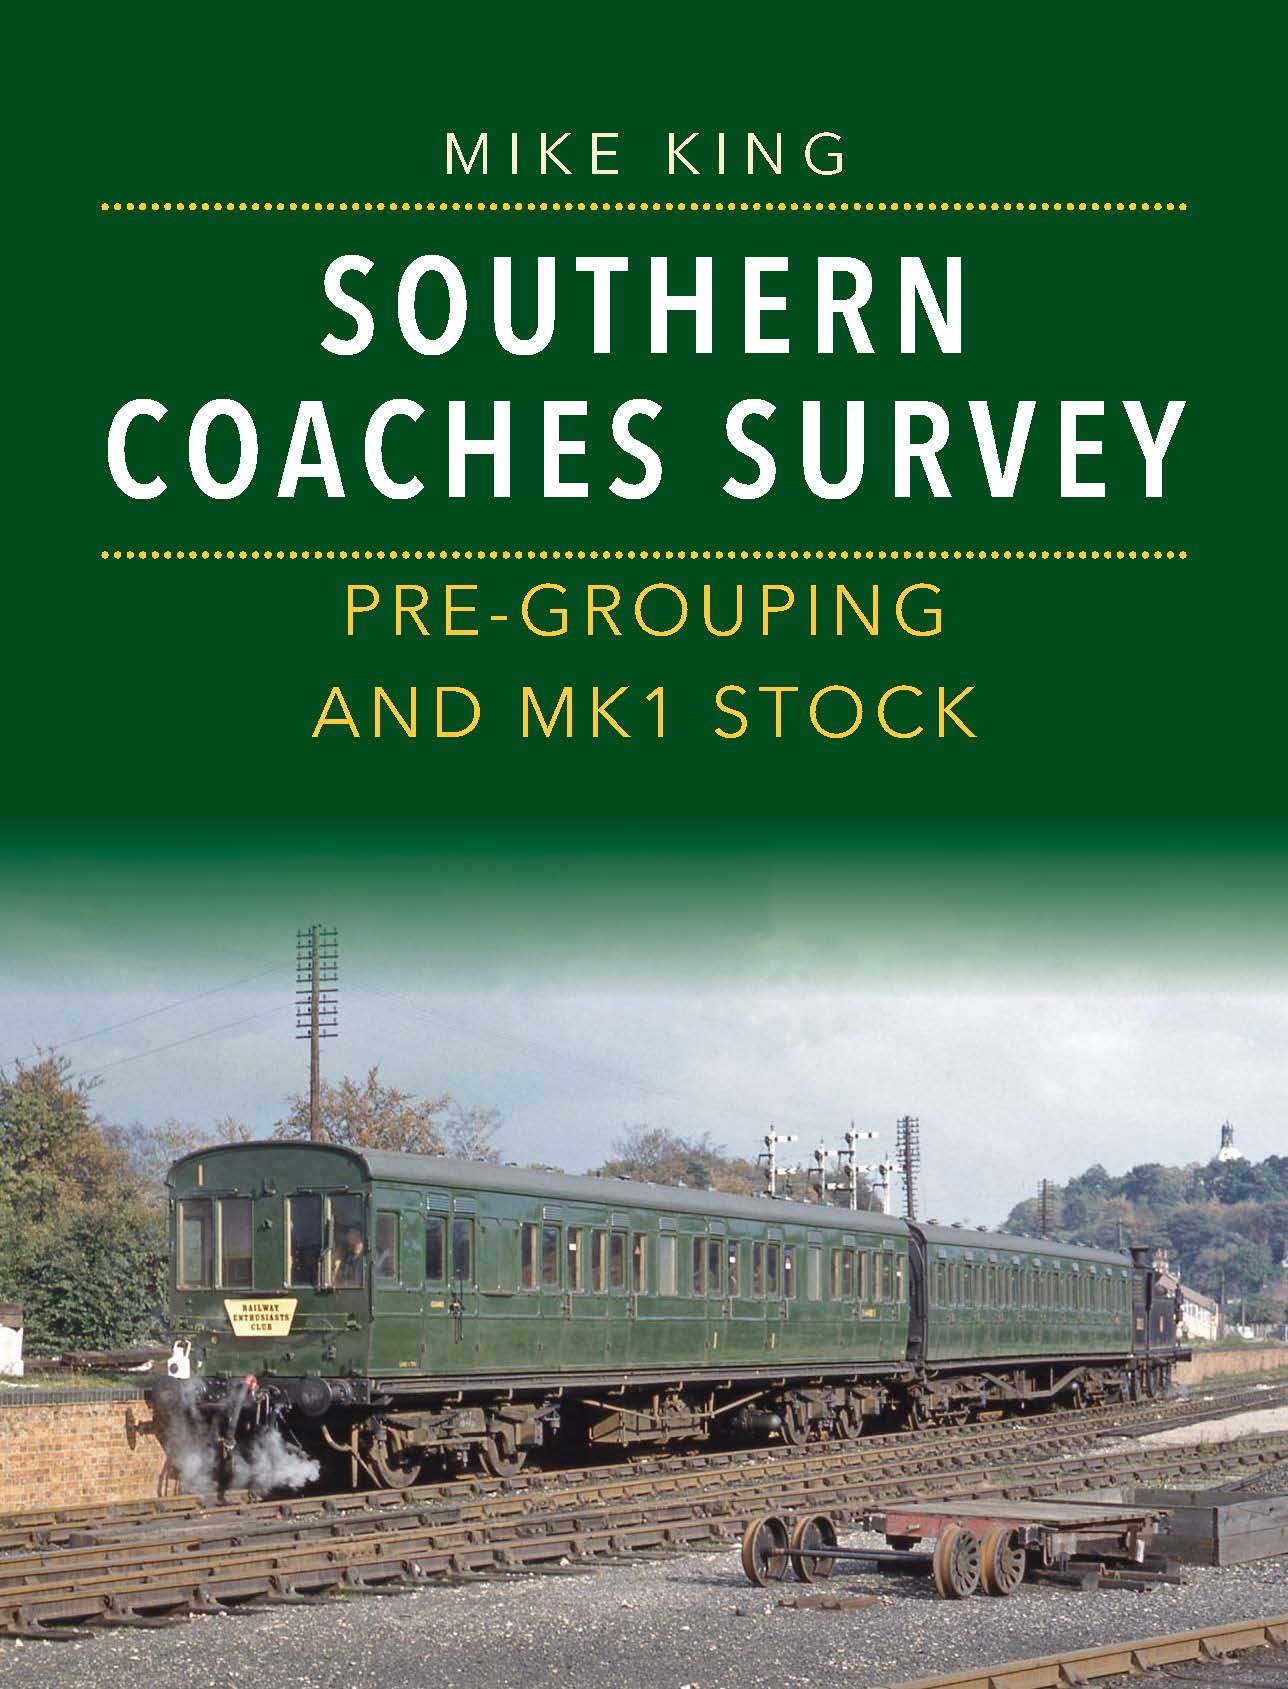 Southern Coaches Survey; Pre-Grouping and BR Mk 1 Stock